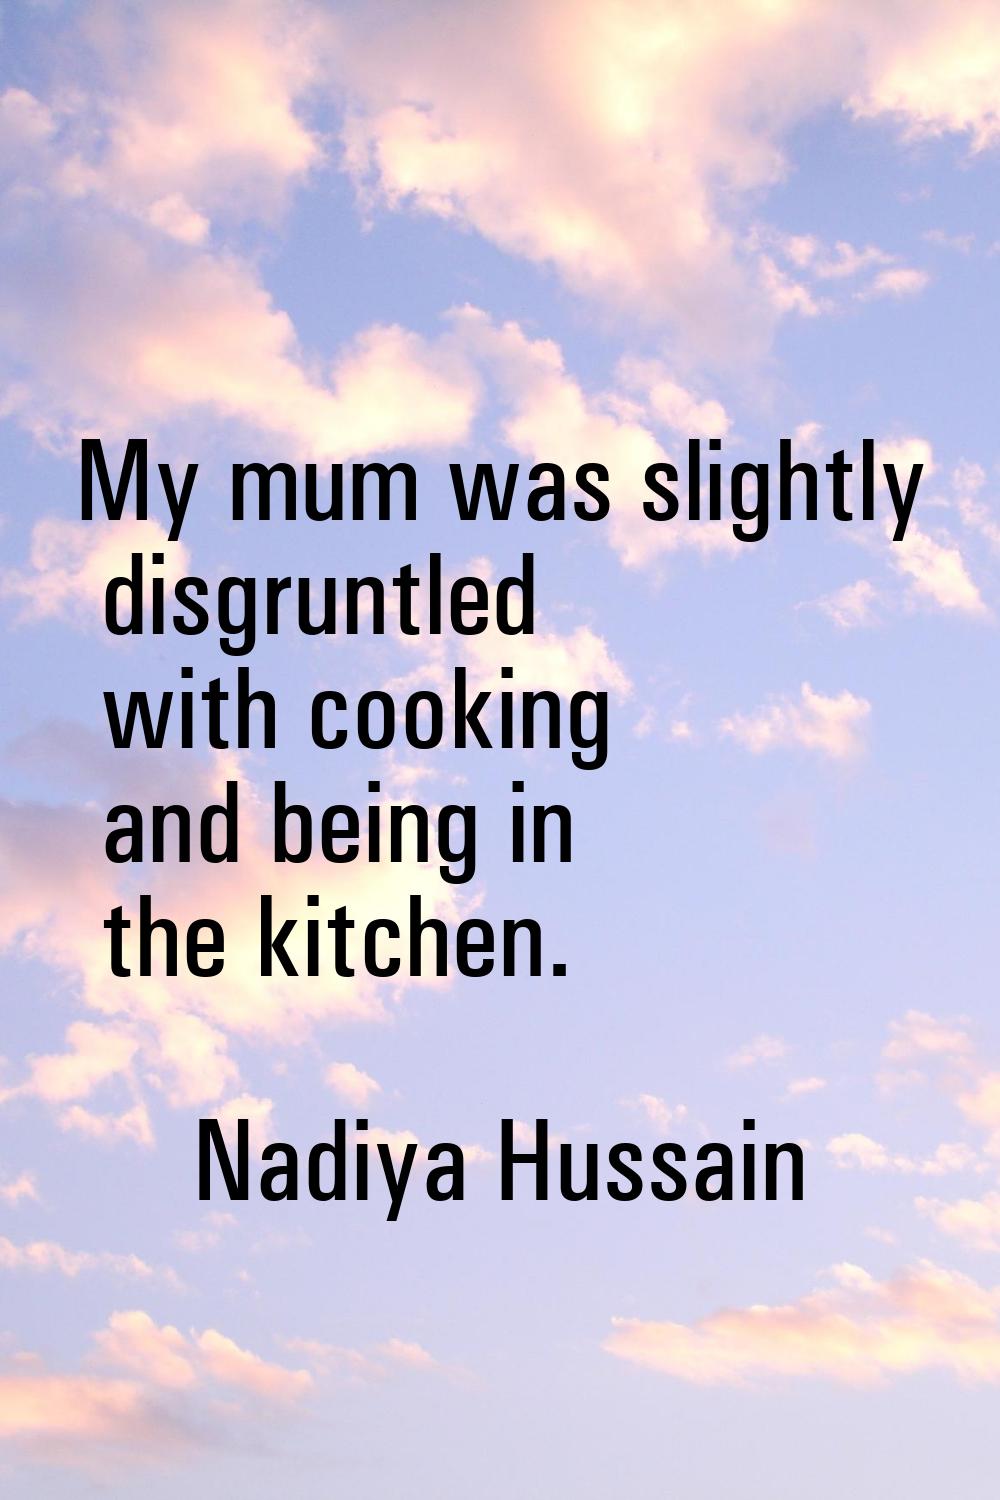 My mum was slightly disgruntled with cooking and being in the kitchen.